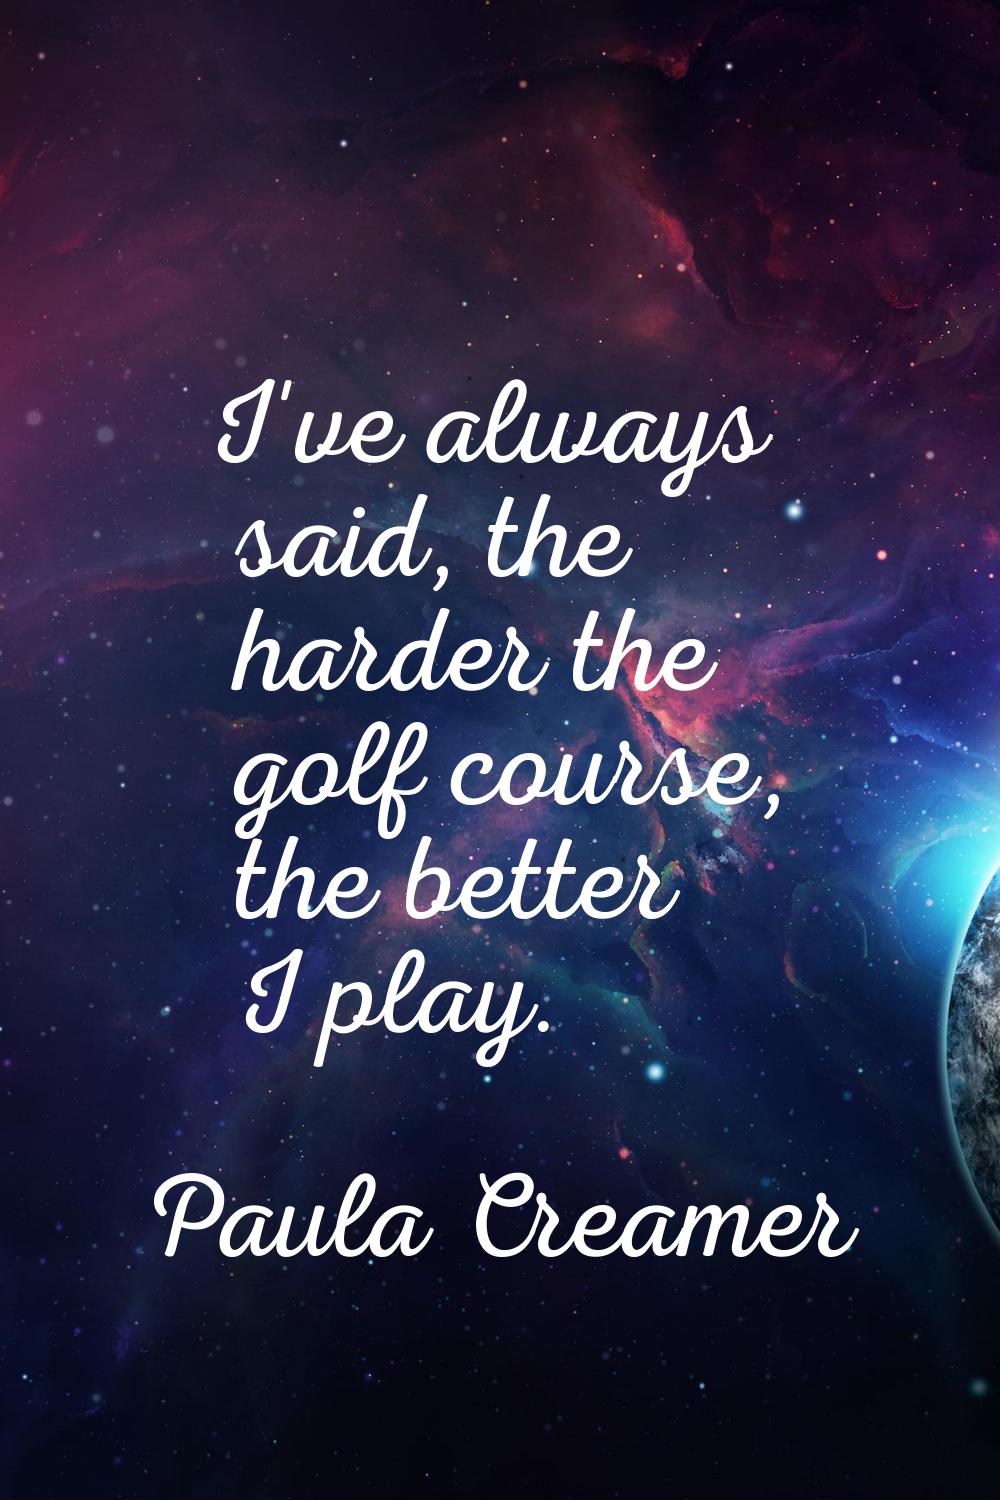 I've always said, the harder the golf course, the better I play.